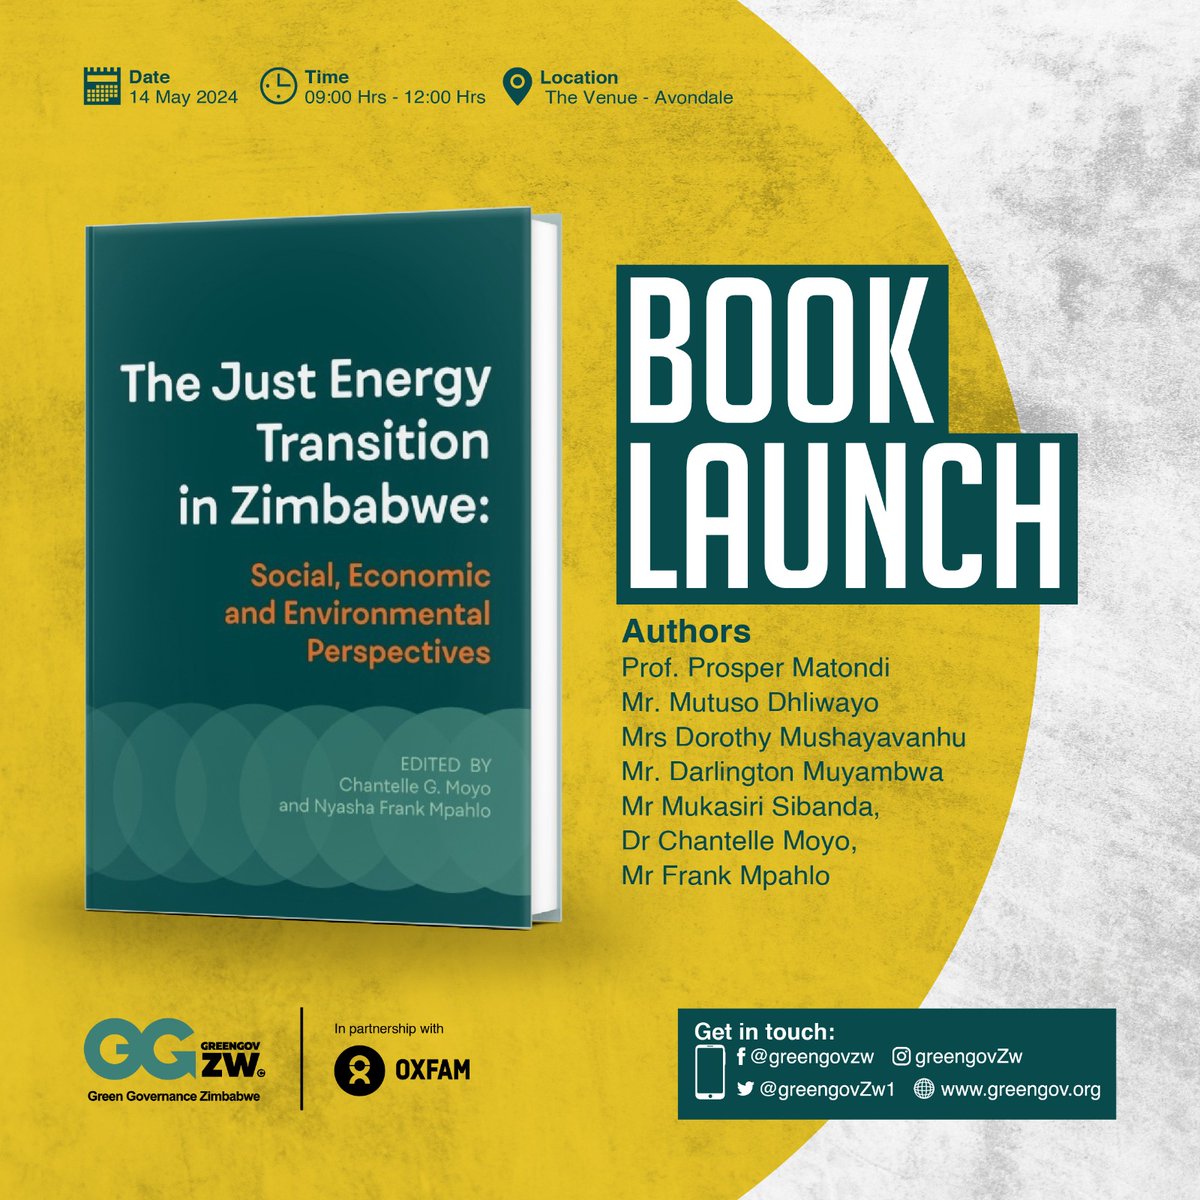 Today we launch our first Book 'The Just Energy Transition: Social, Economic and Environmental' at the Venue, Harare. The phenomenal book is a product of our Climate Media Collaborative Project funded by @OxfaminZim. Special mention to our book contributors listed on the flier.